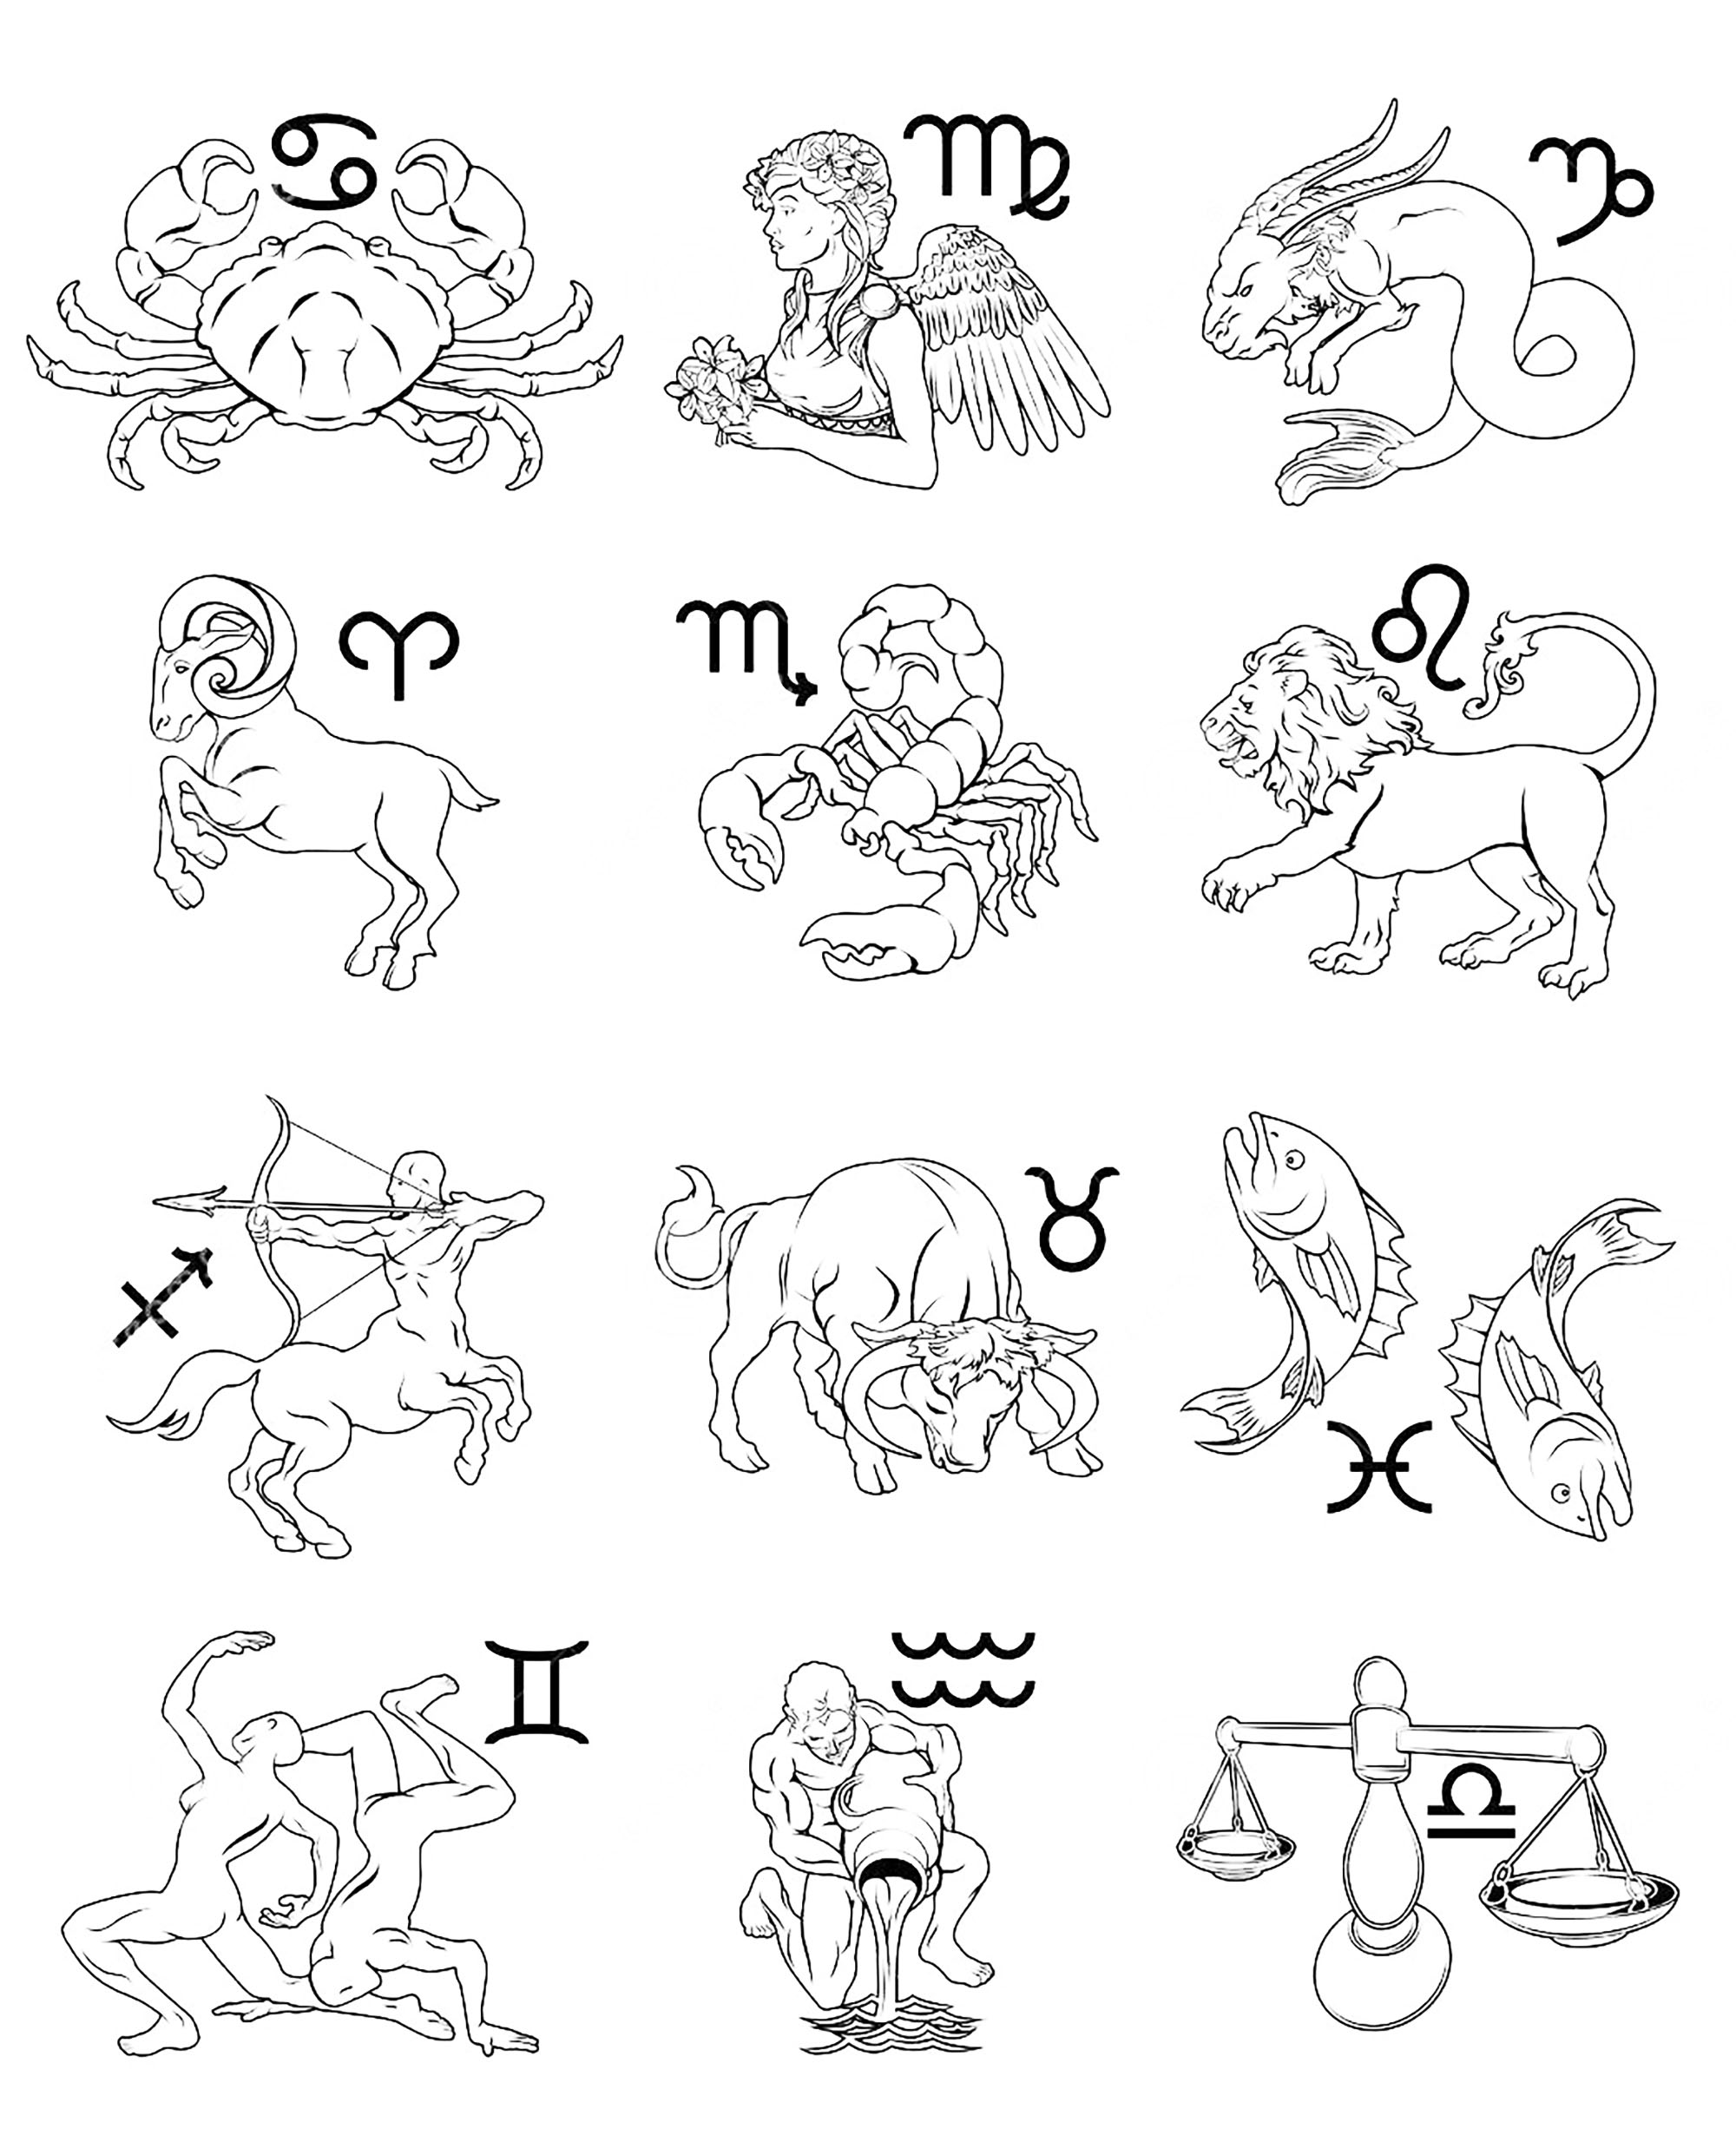 Zodiac signs to print   Zodiac Signs Kids Coloring Pages